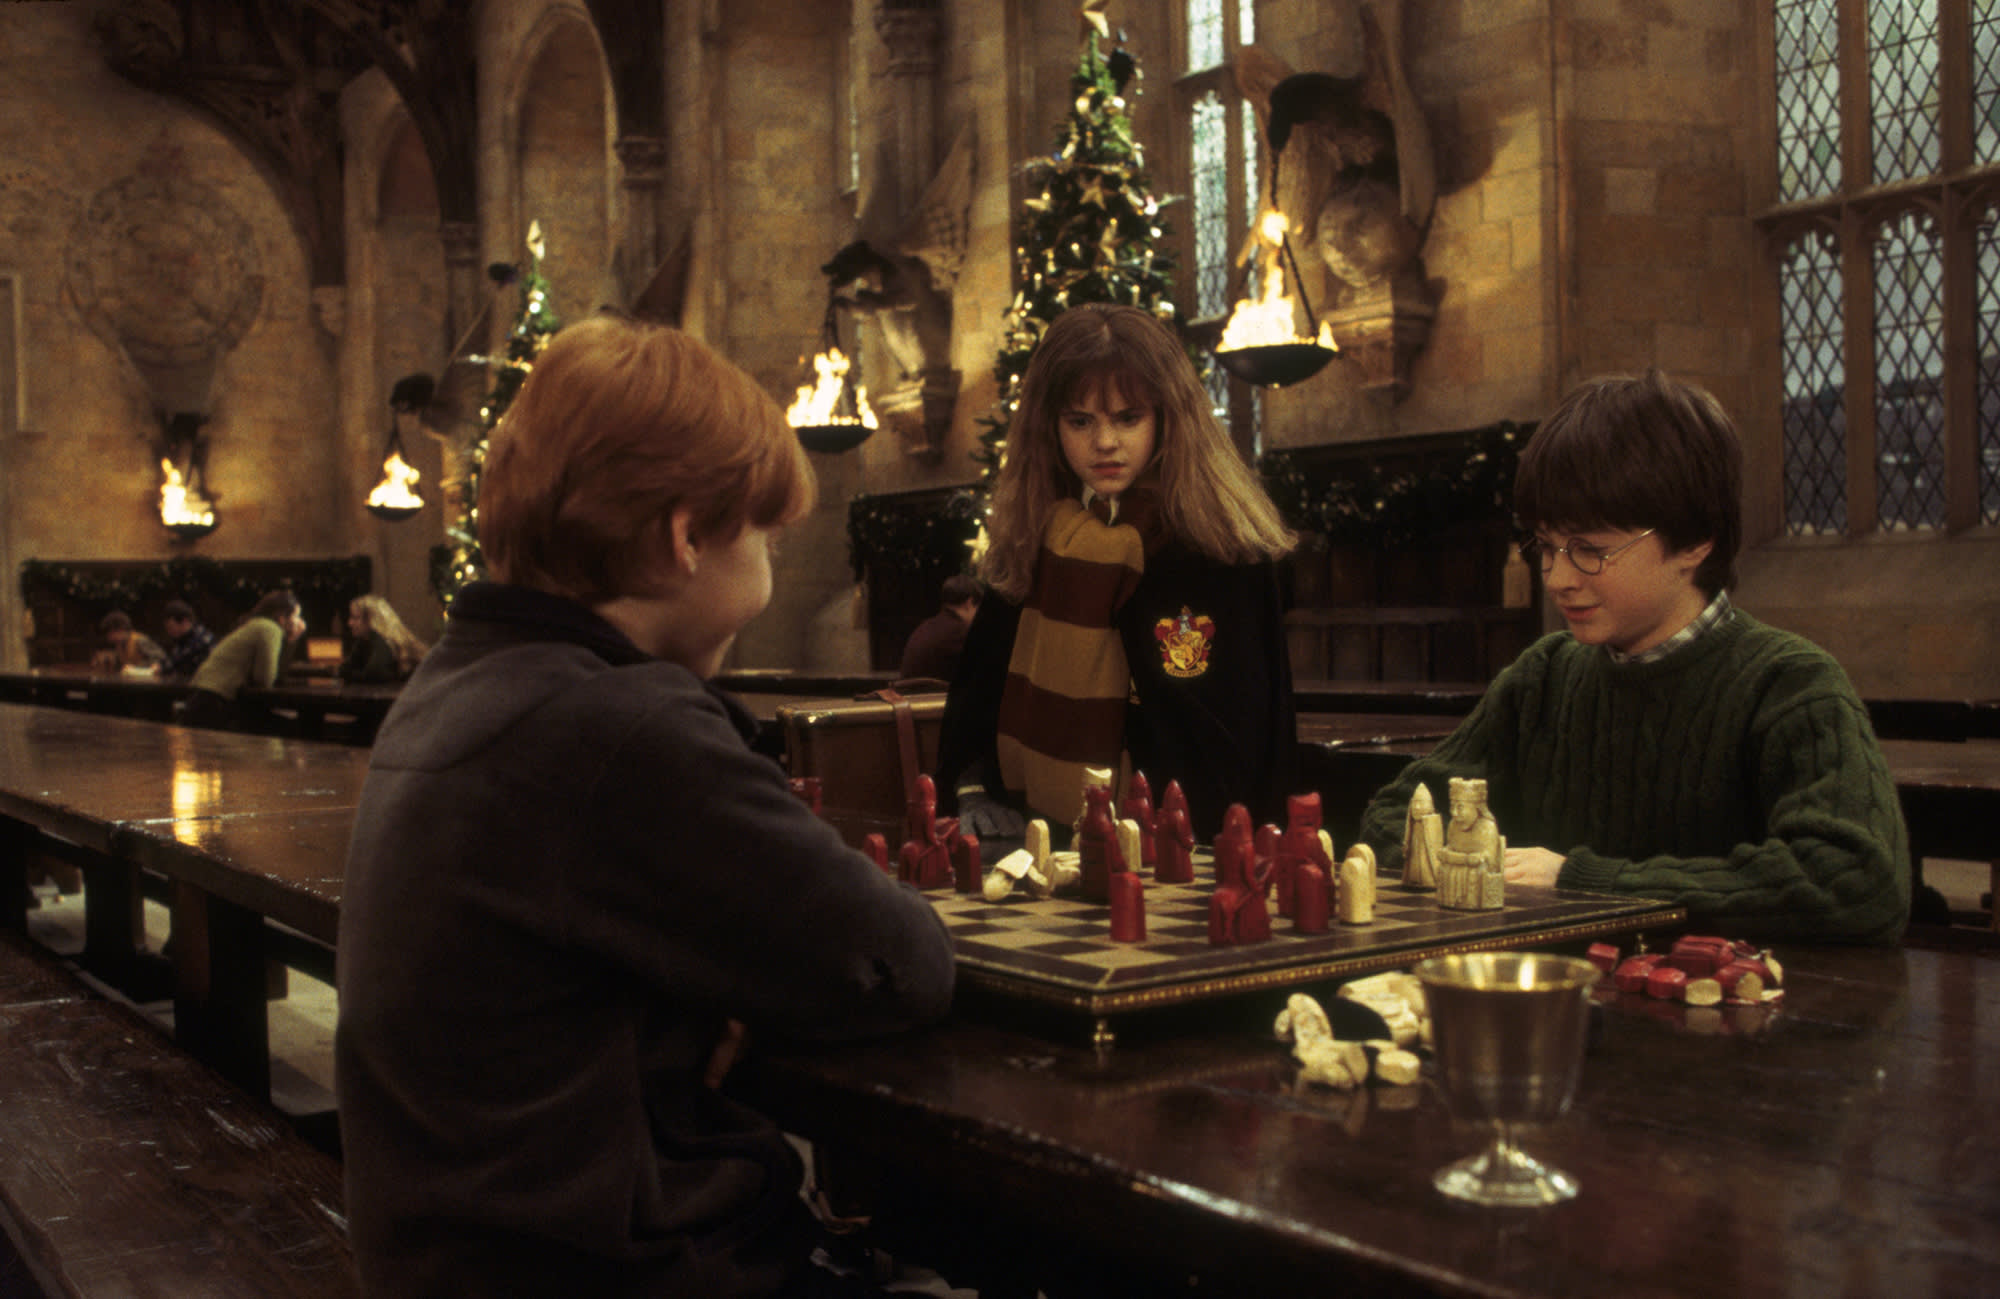 HP-F1-philosophers-stone-ron-harry-hermione-great-hall-chess-christmas-decorated-web-landscape